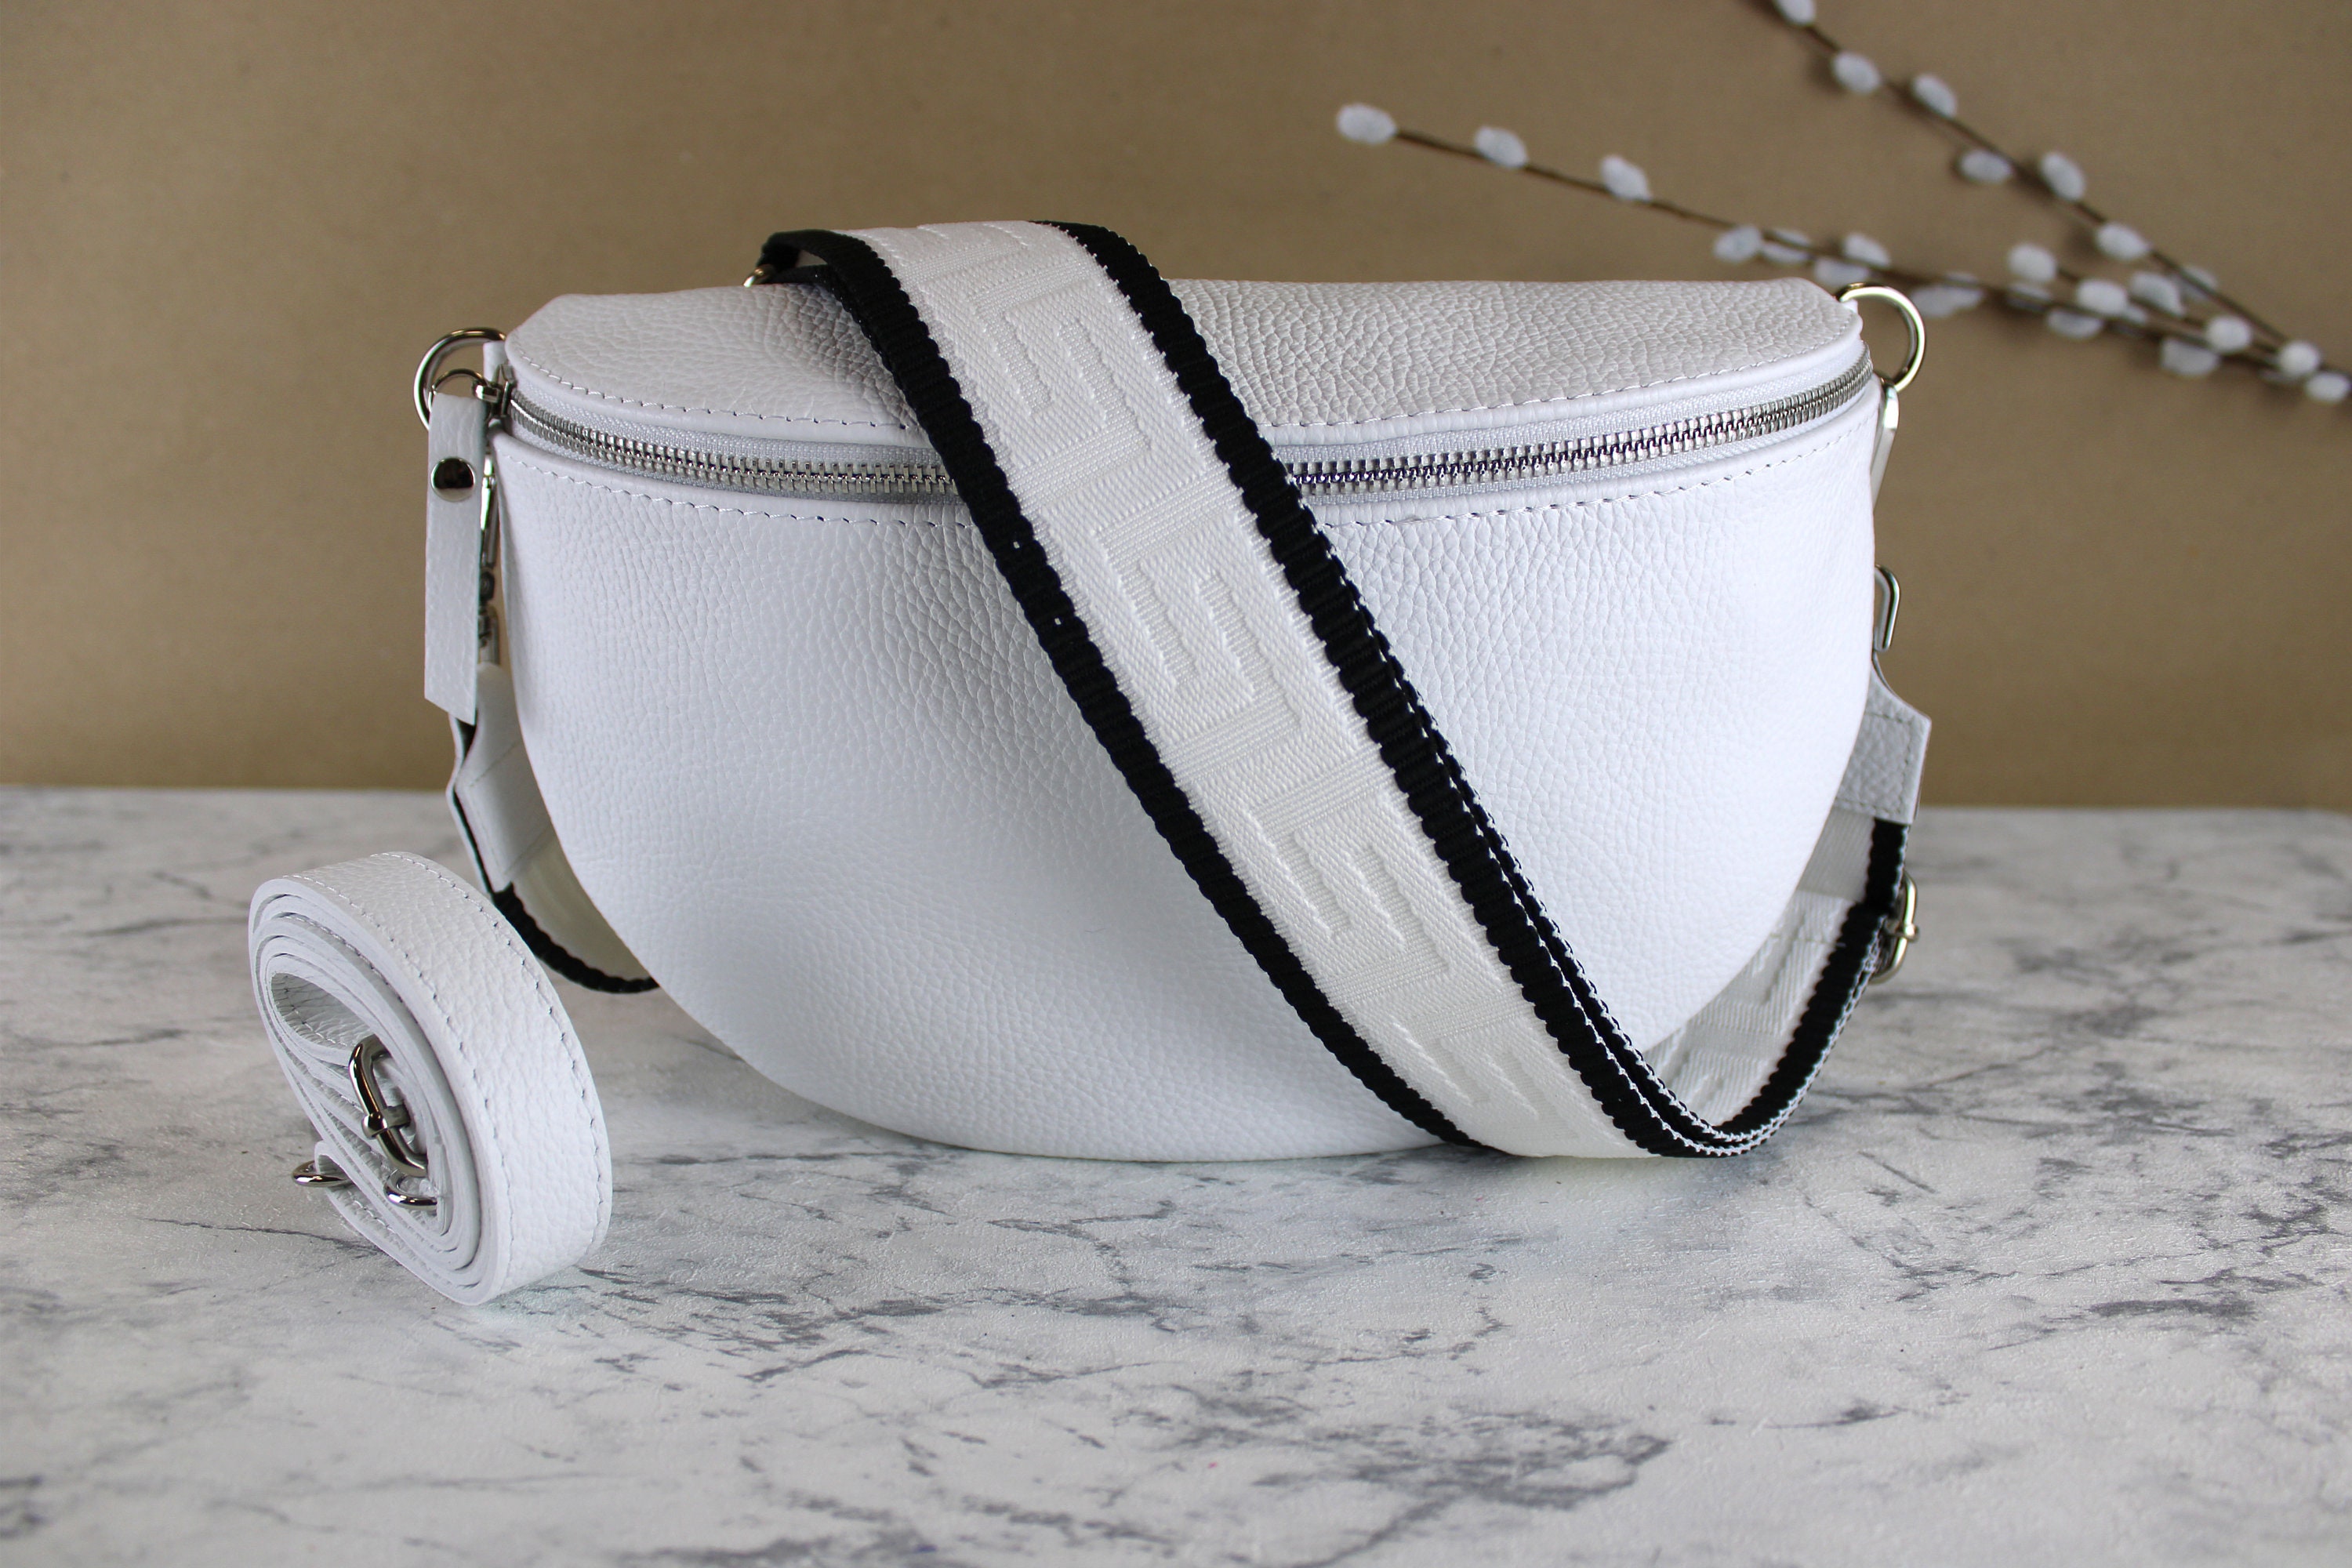 White Waist Bag for Women With Leather Belt and Patterned 